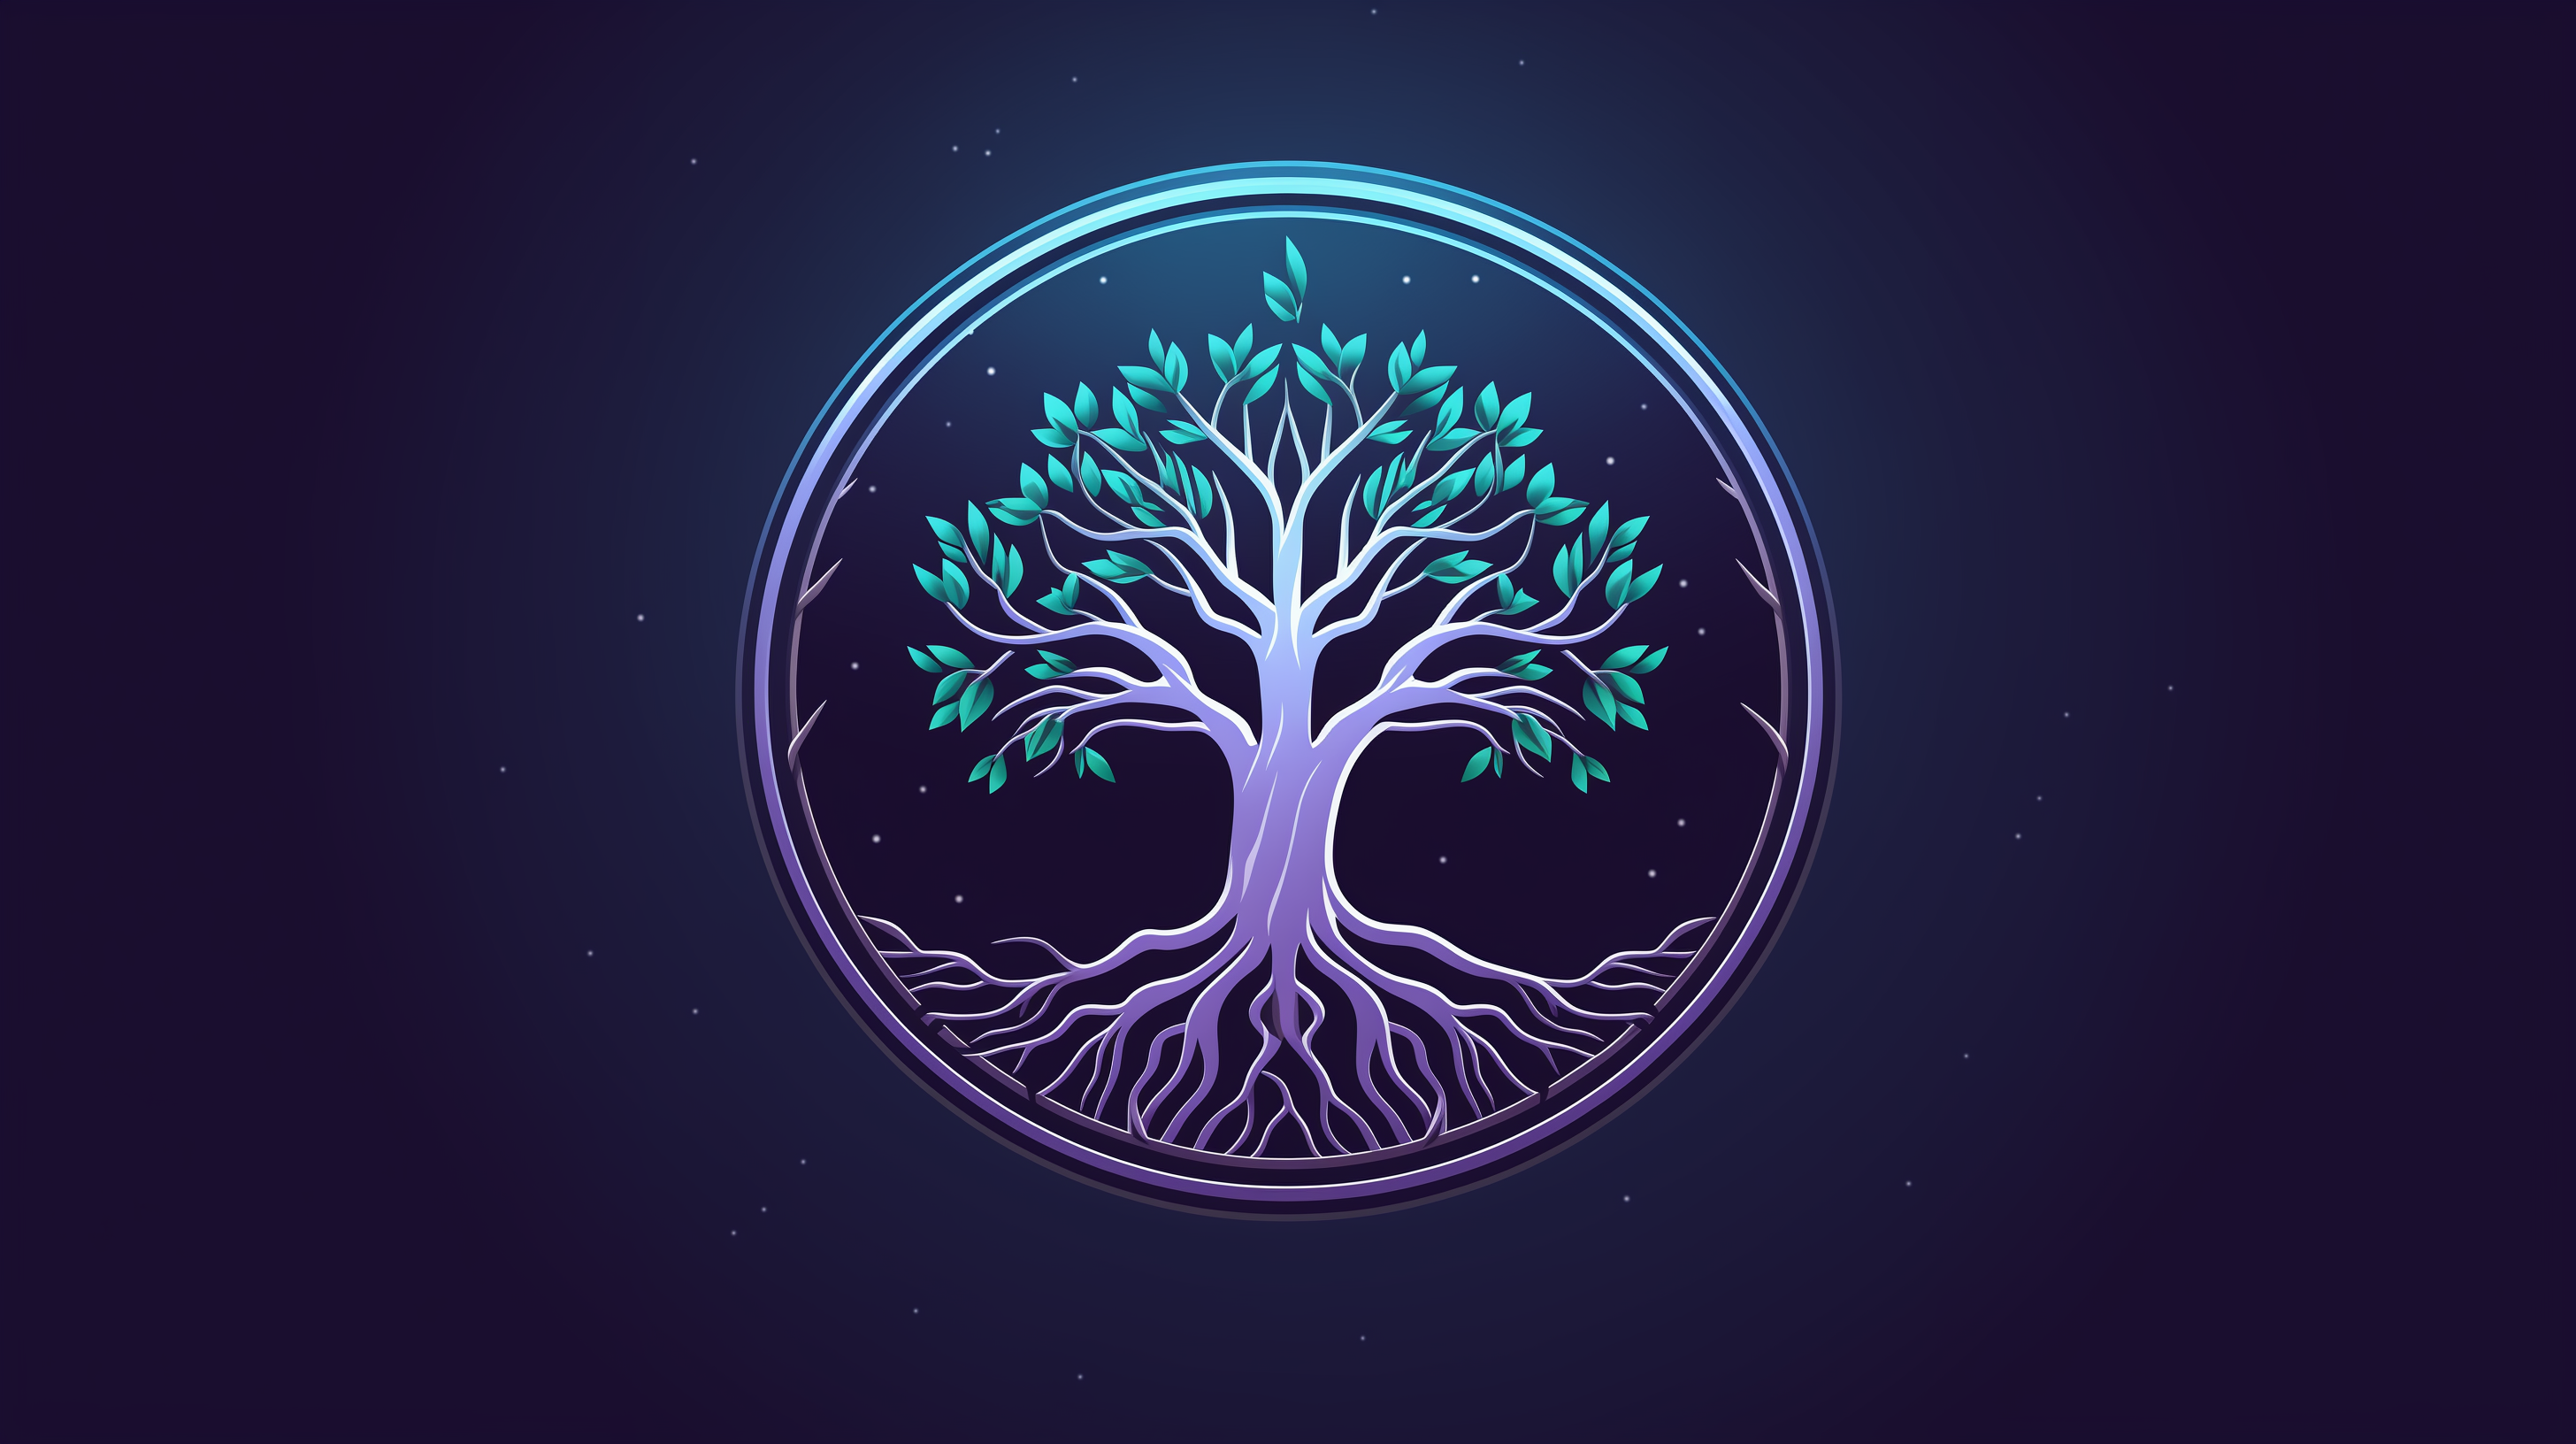 HD Wallpaper of a stylized Yggdrasil tree logo with vibrant green leaves and a circular frame against a starry night background.